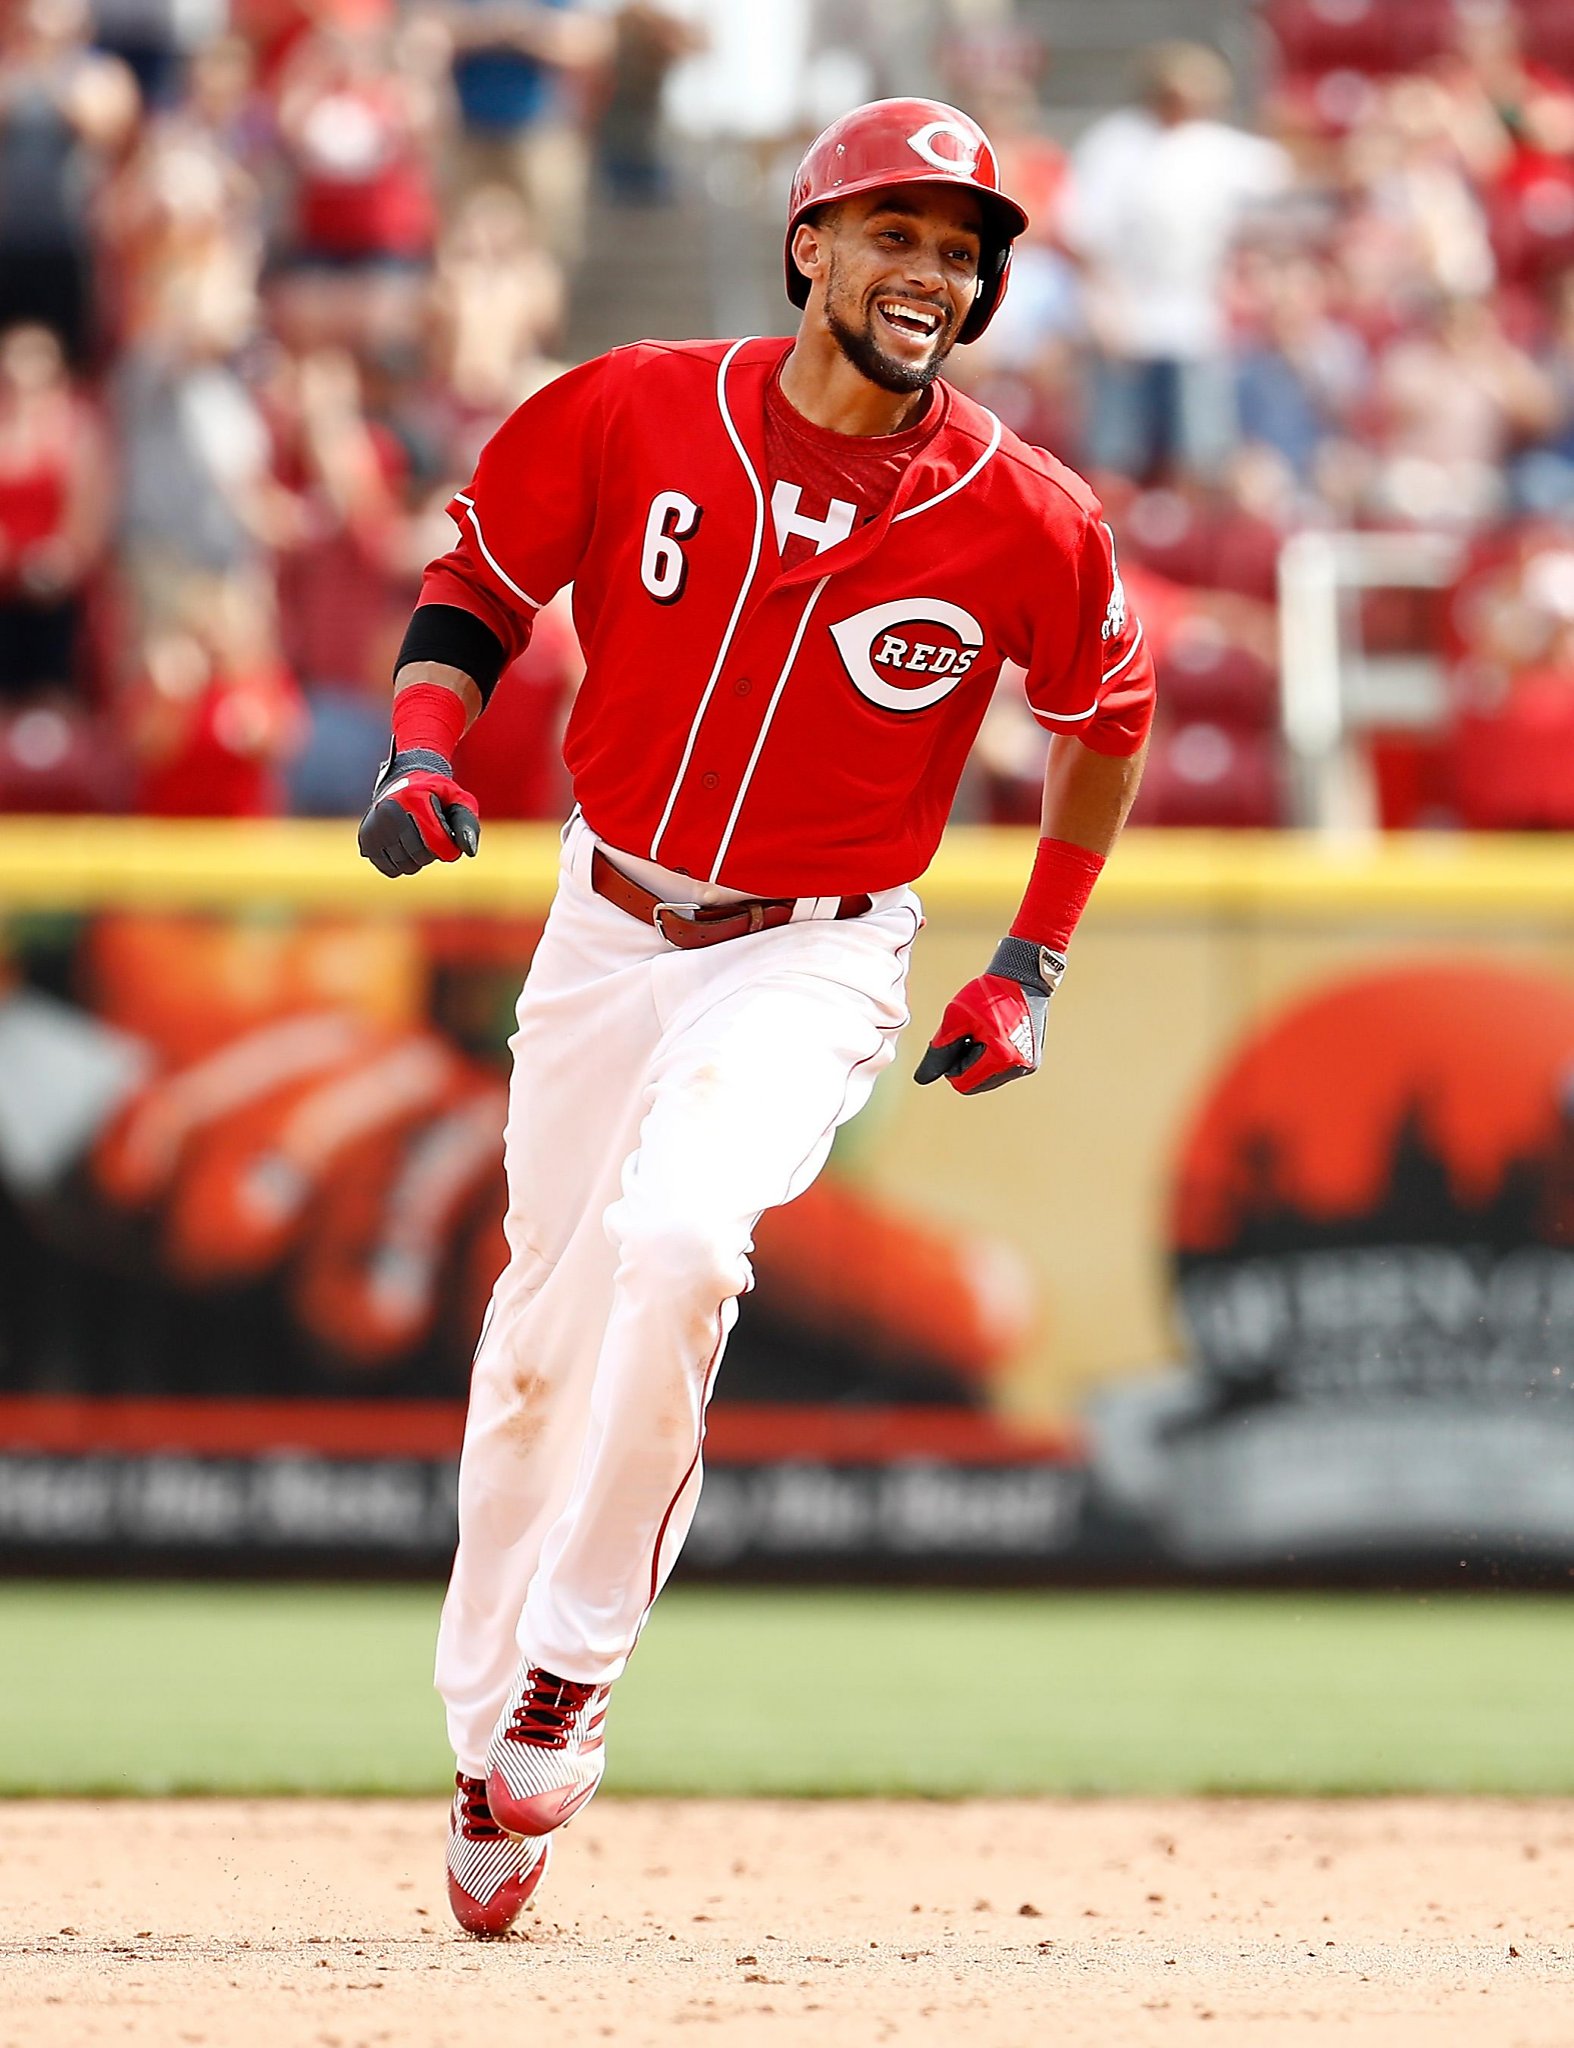 Billy Hamilton: Email says Reds outfielder will meet boy with jersey